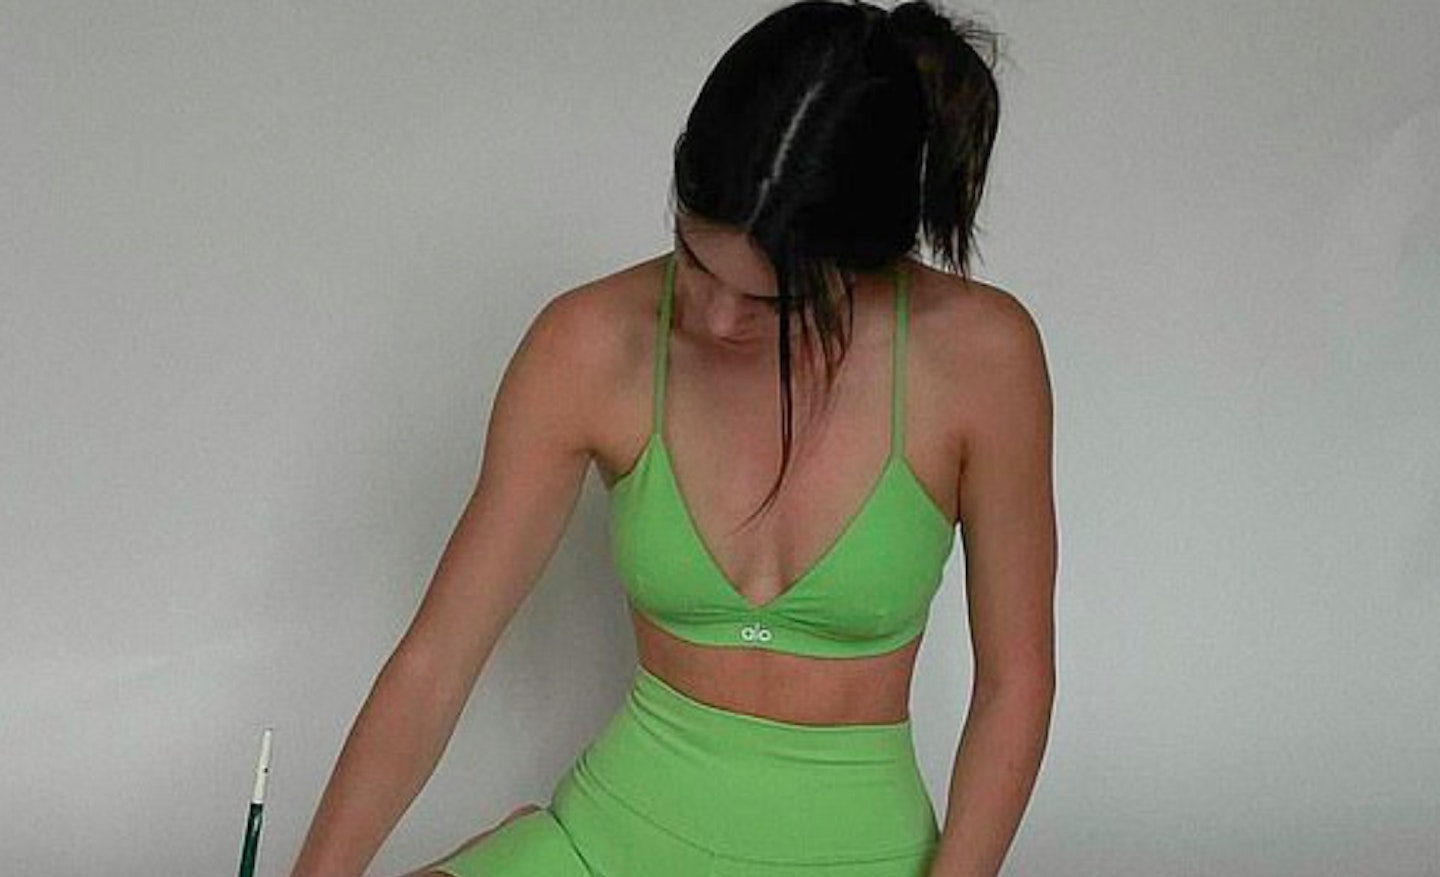 Kendall Jenner Partners With Alo Yoga: Pics